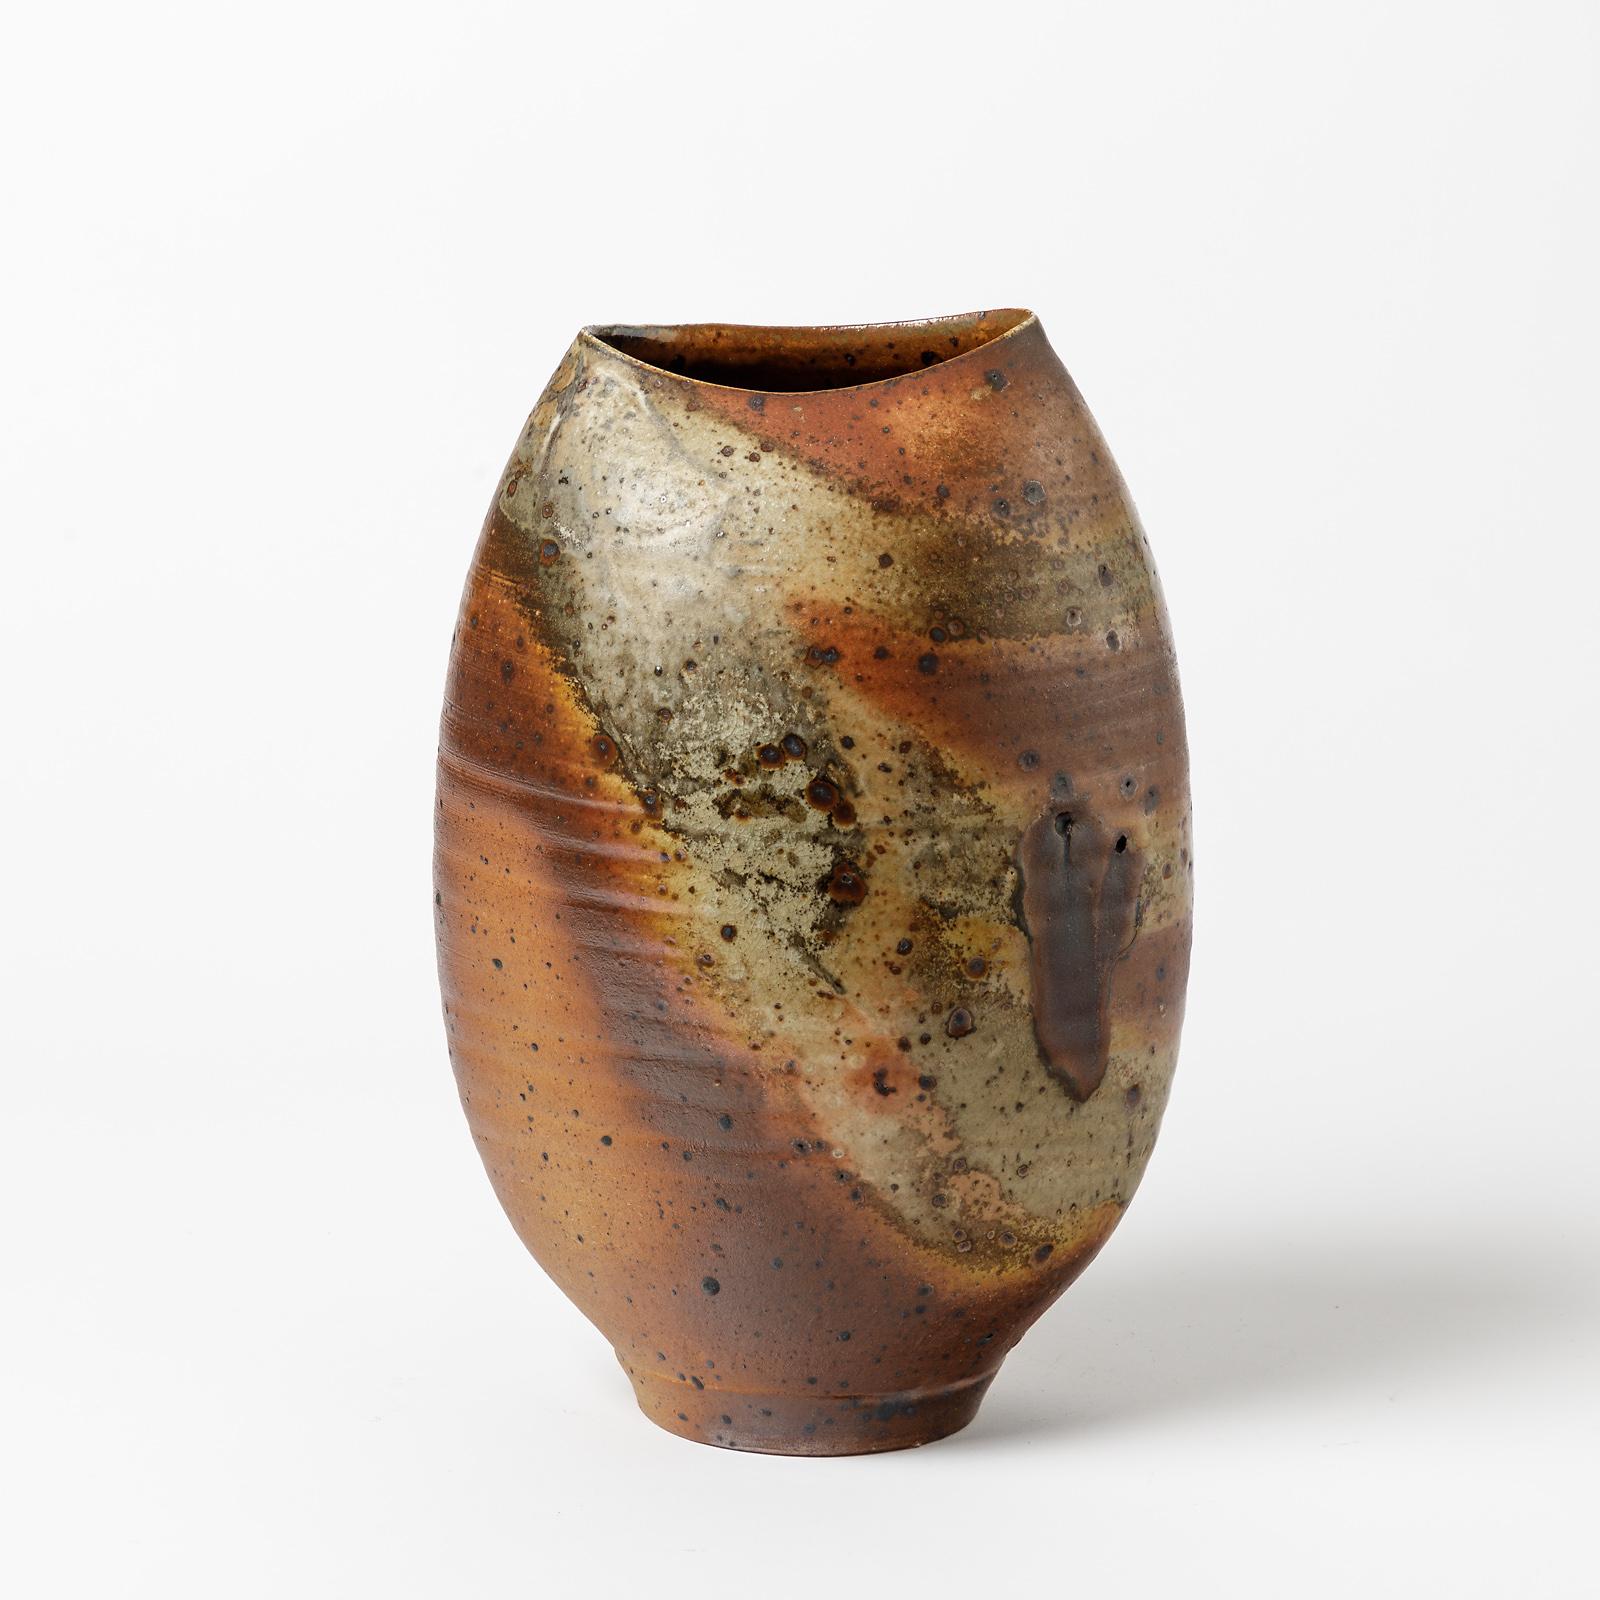 A ceramic vase with wood firing by Bruno H' rdy.
Signed at the base.
Perfect original conditions.
Circa 1970-1980.
Unique piece.